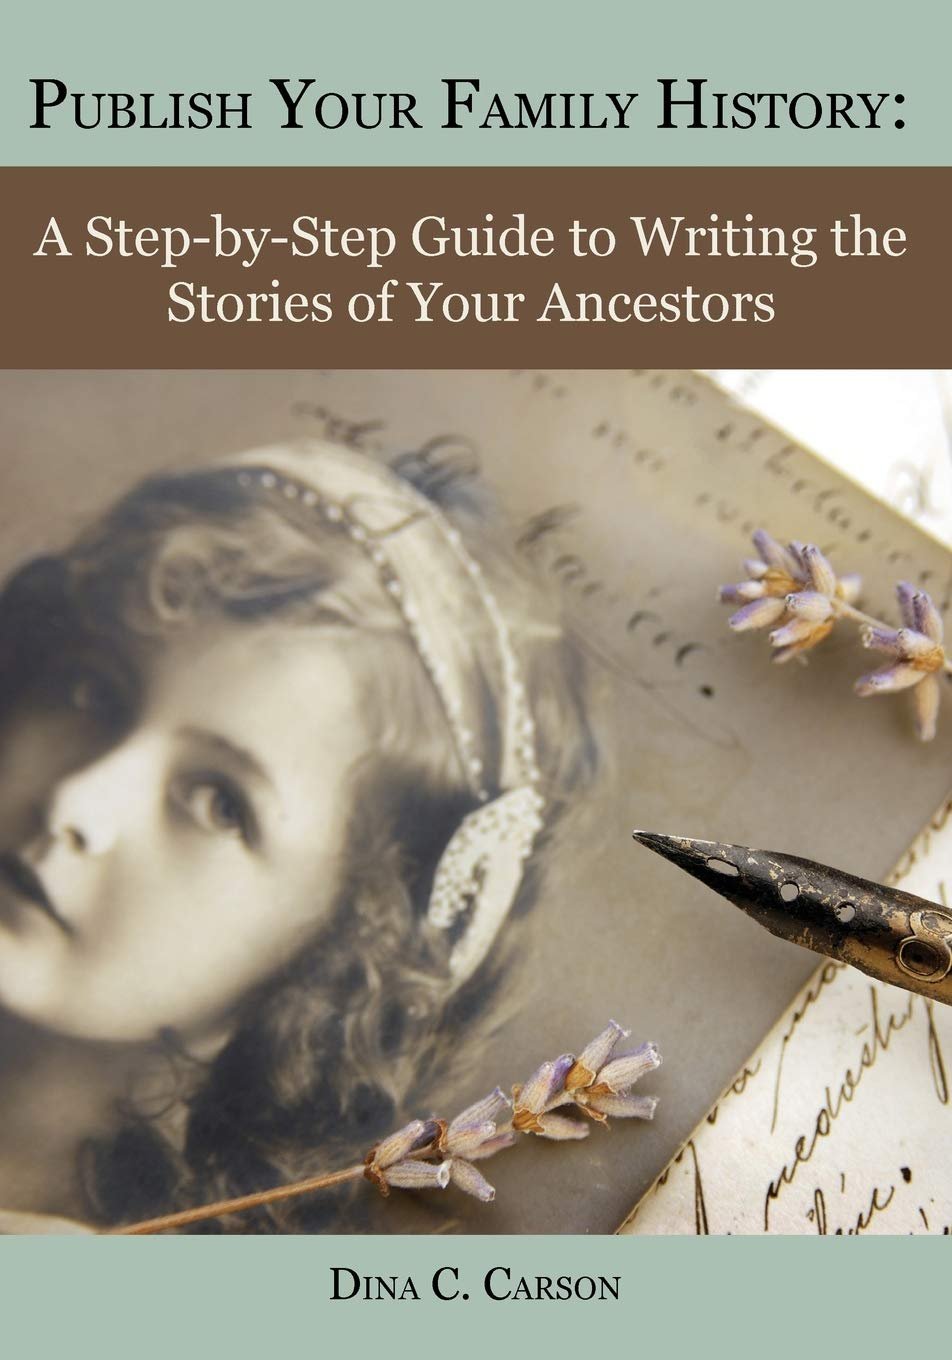 Publish Your Family History: A Step-by-Step Guide to Writing the Stories of Your Ancestors by Dina C. Carson